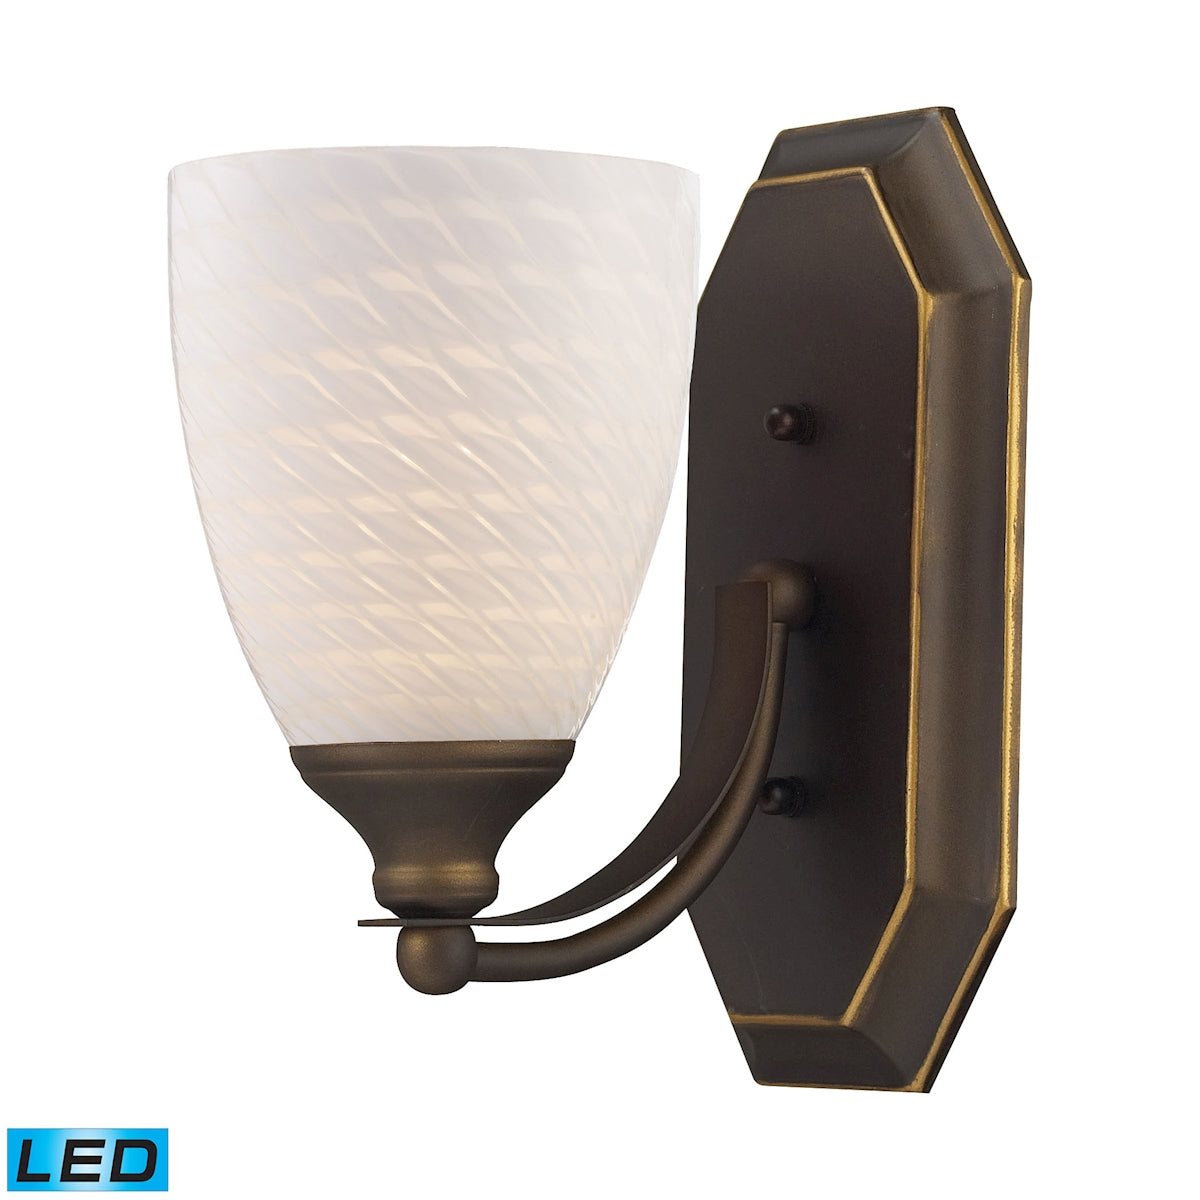 ELK Lighting 570-1B-WS-LED Mix-N-Match Vanity 1-Light Wall Lamp in Aged Bronze with White Swirl Glass - Includes LED Bulb